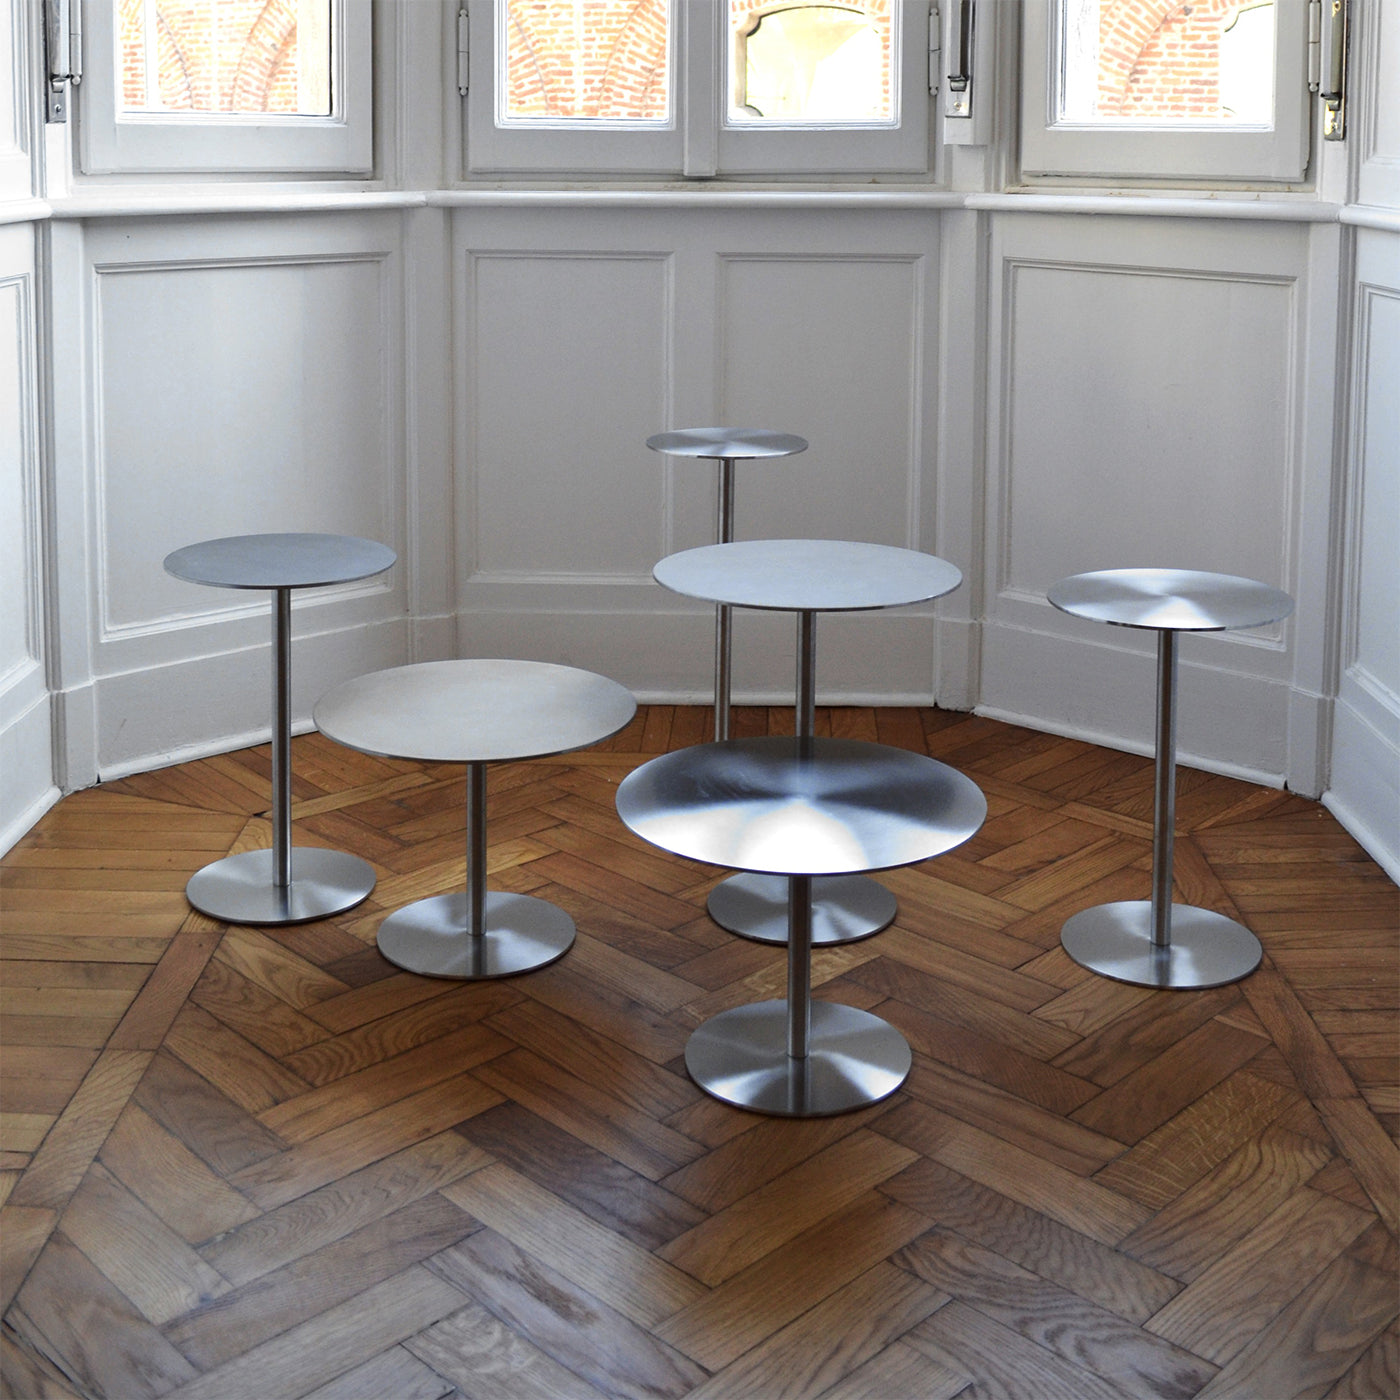 Ester Stainless Steel Table - Alternative view 1